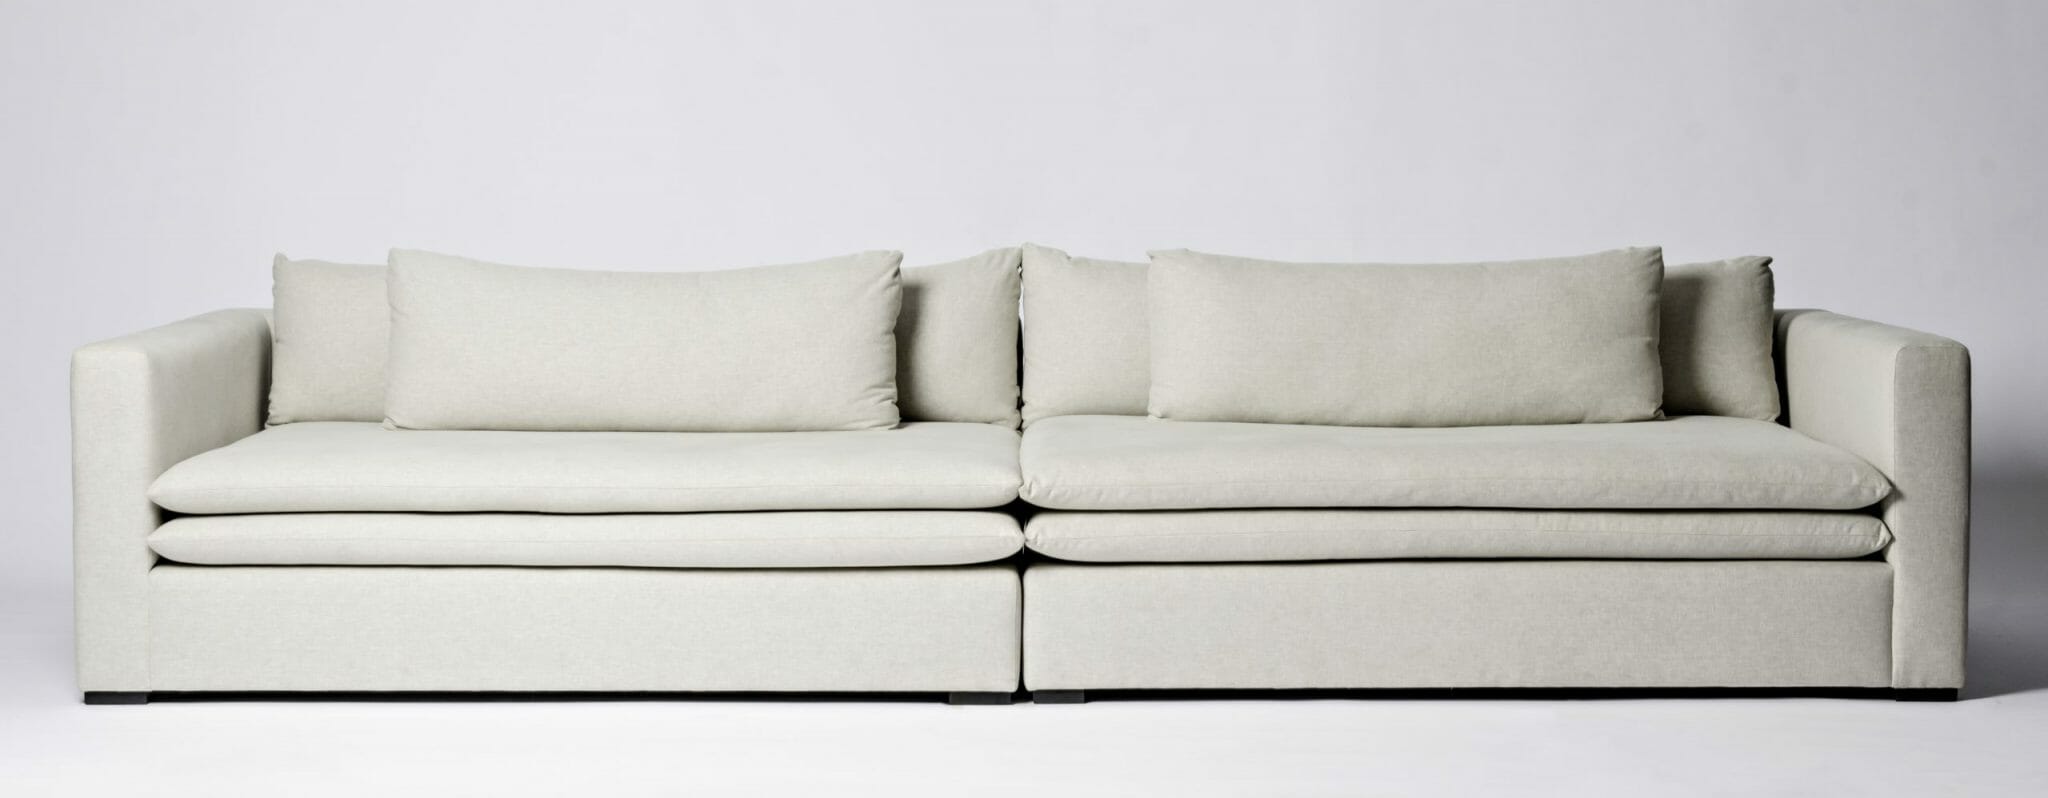 Couch double base cushion luxury